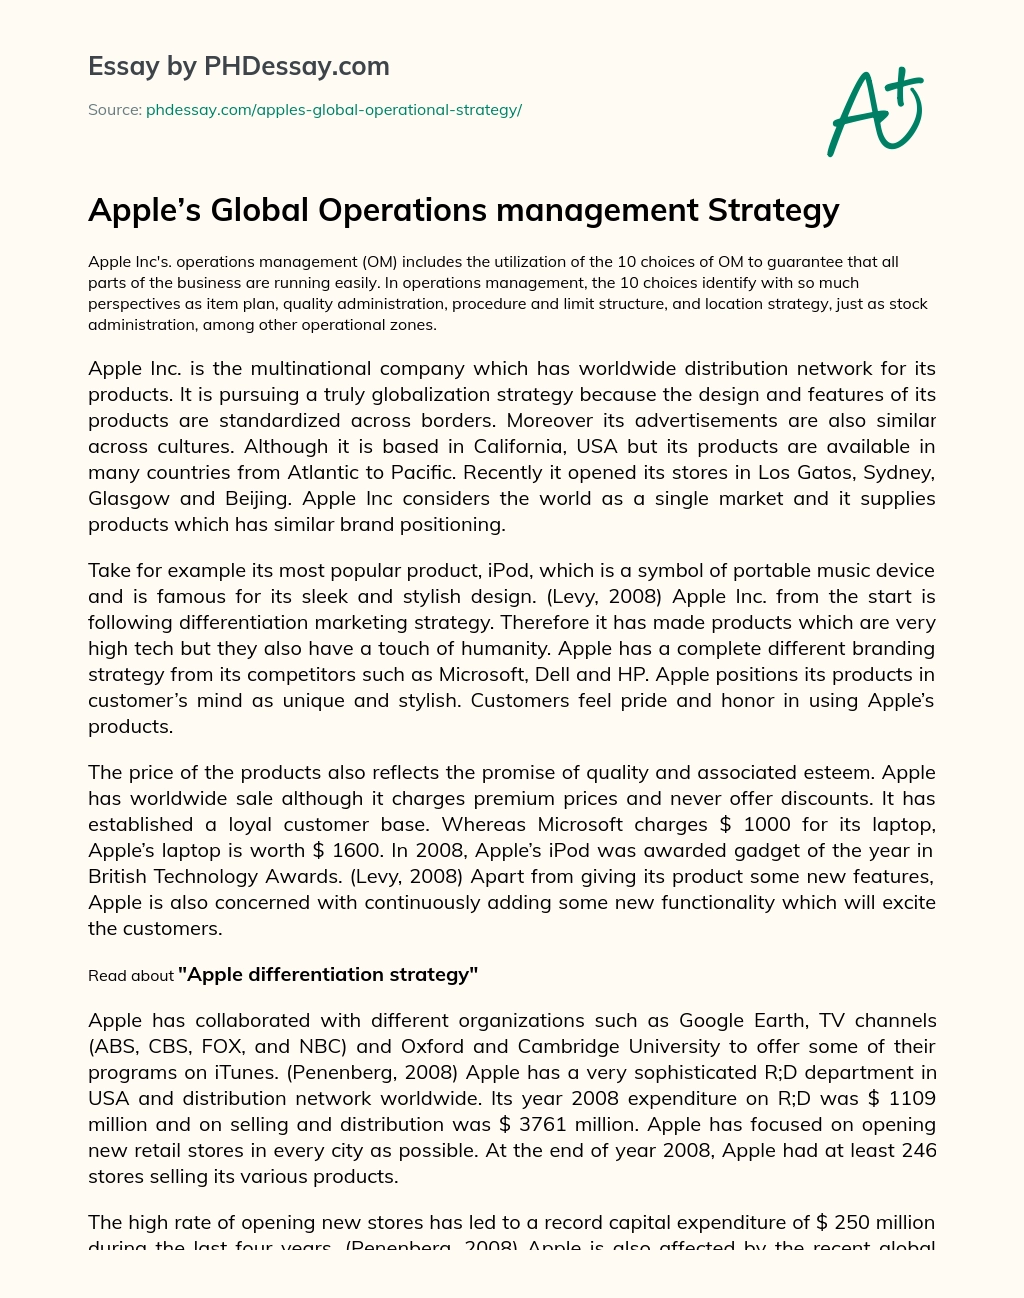 Apple’s Global Operations management Strategy essay